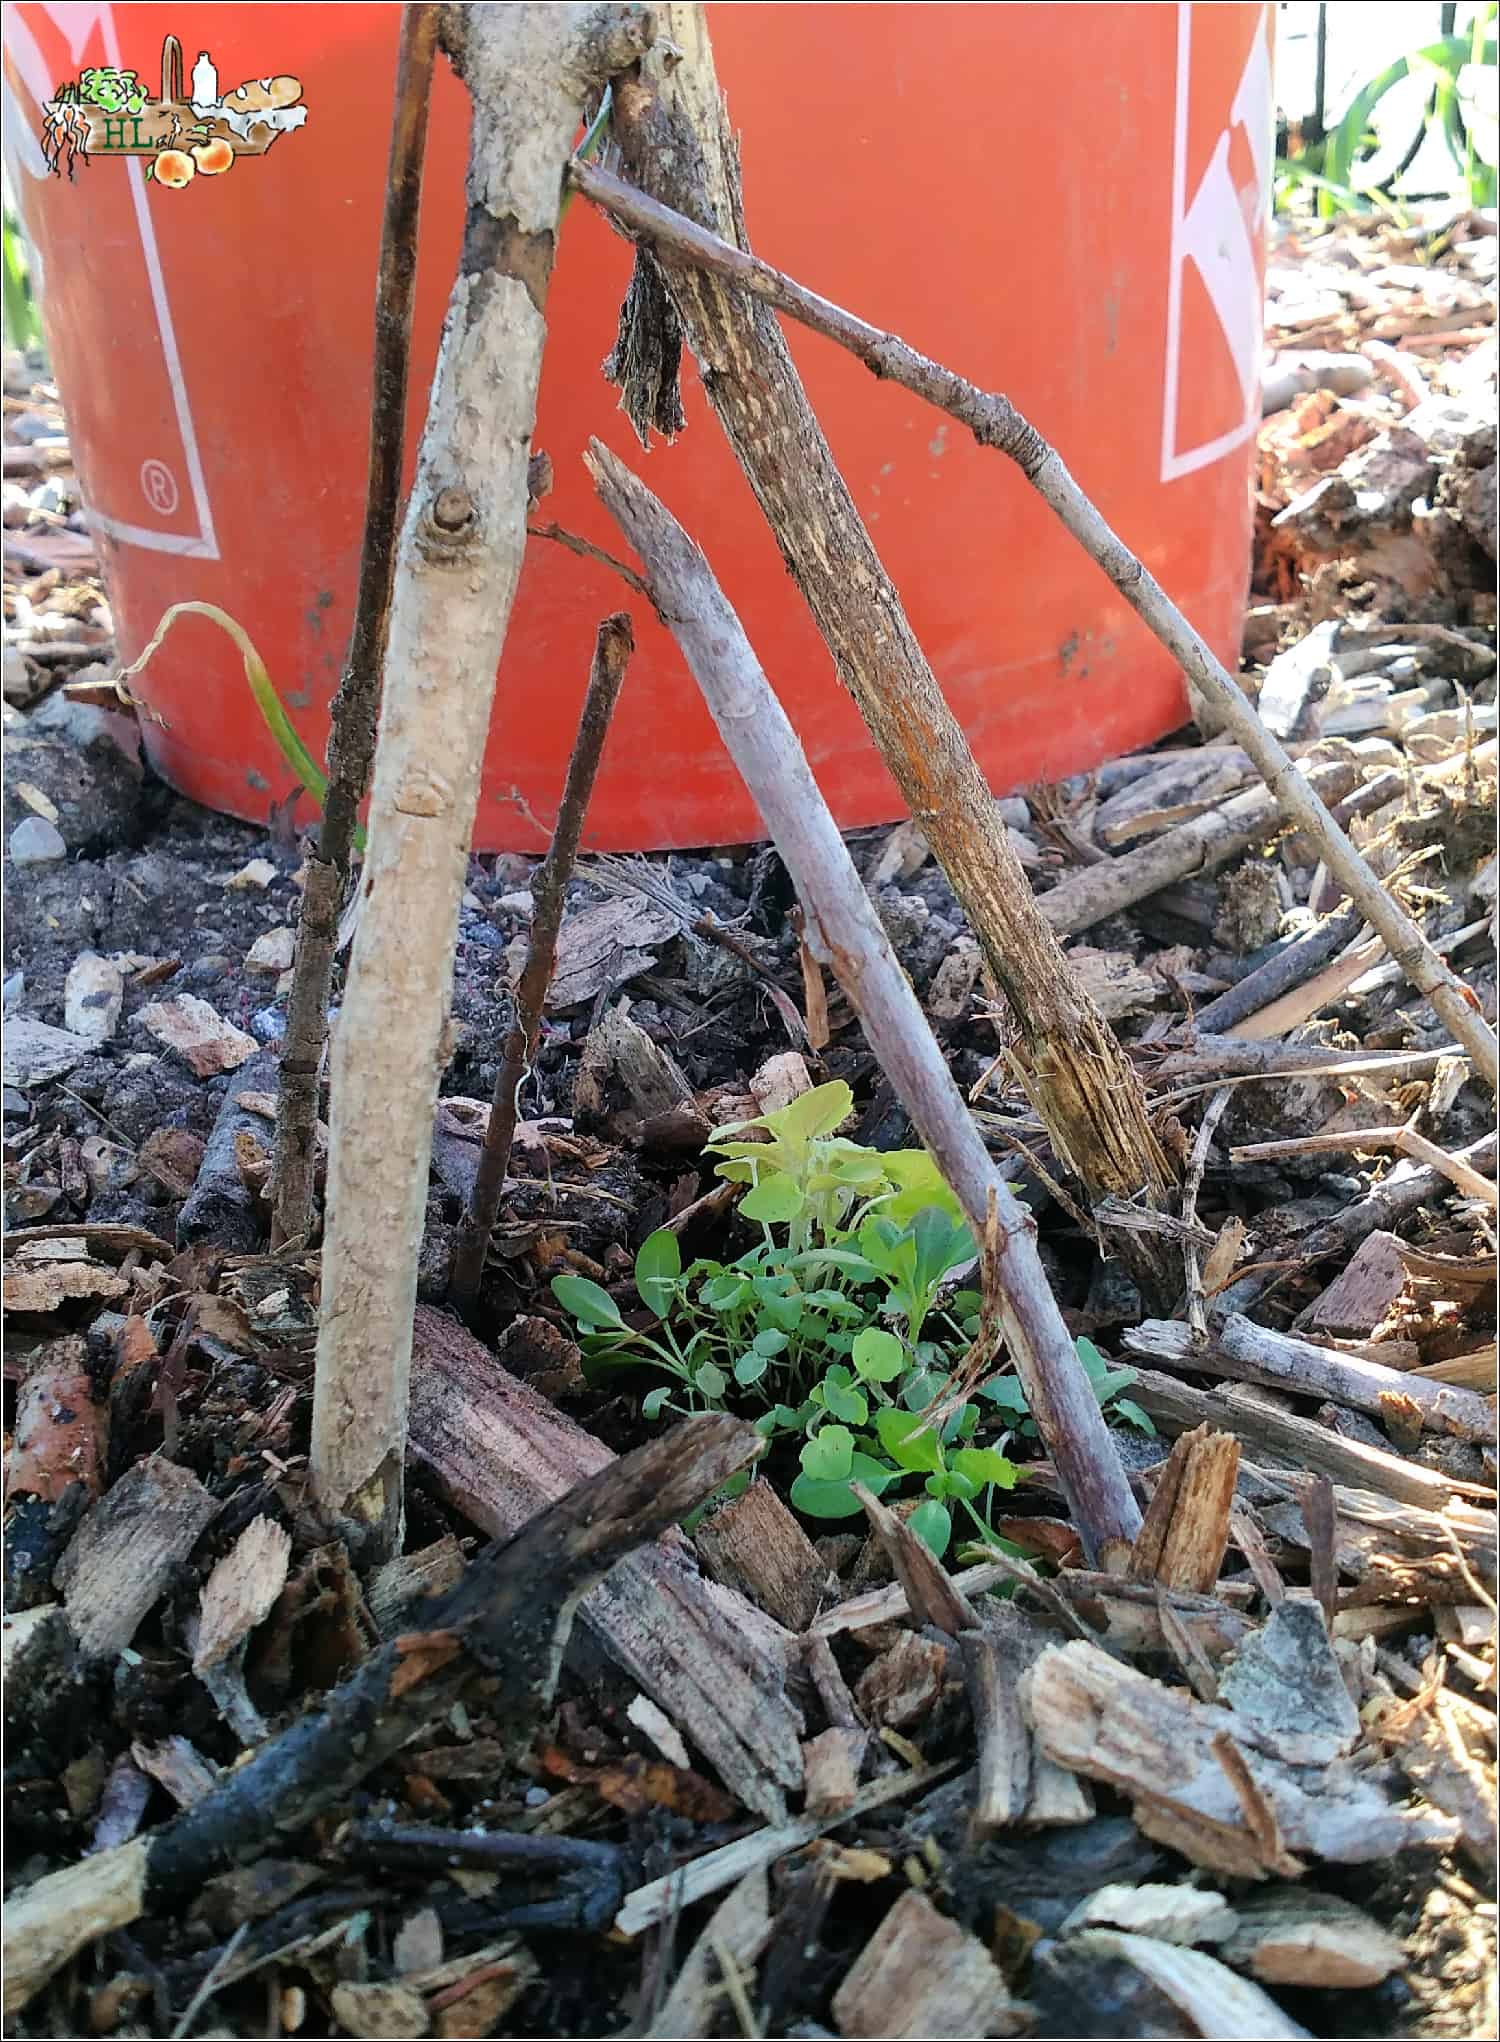 Sticks in the ground over baby plants